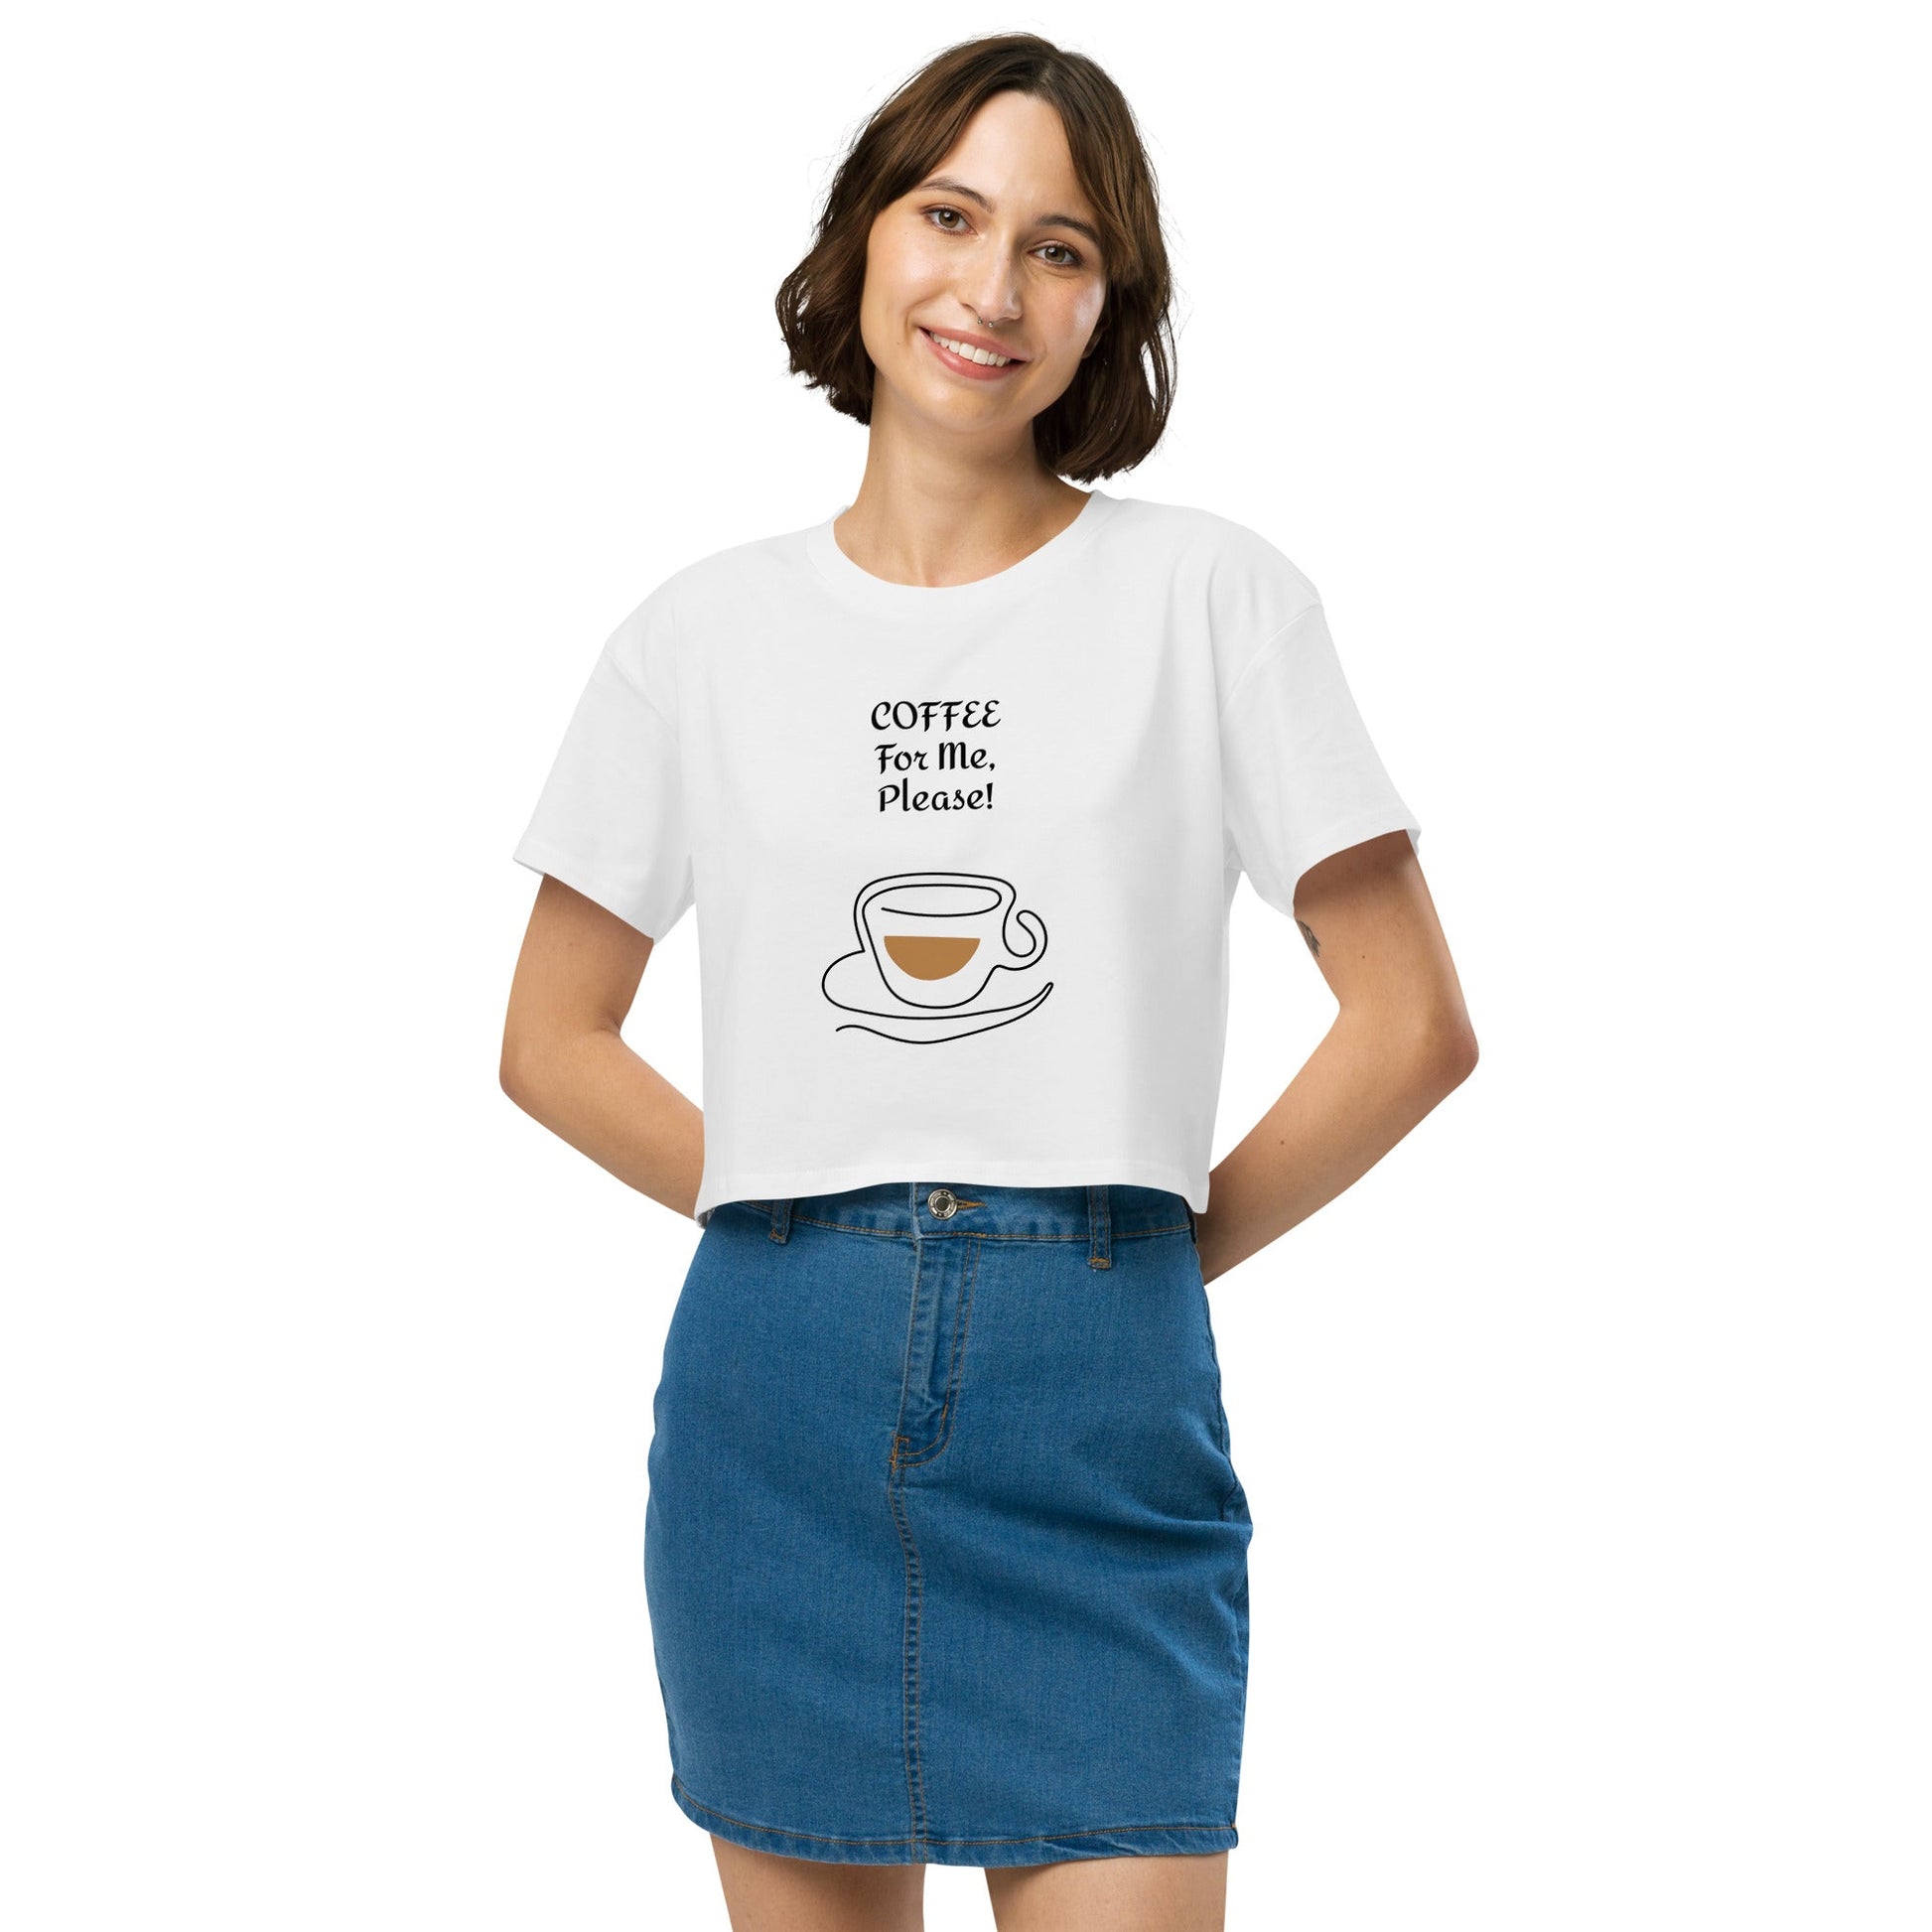 COFFEE For ME, Please! w/ a Cup and Saucer Women’s crop top - Lizard Vigilante